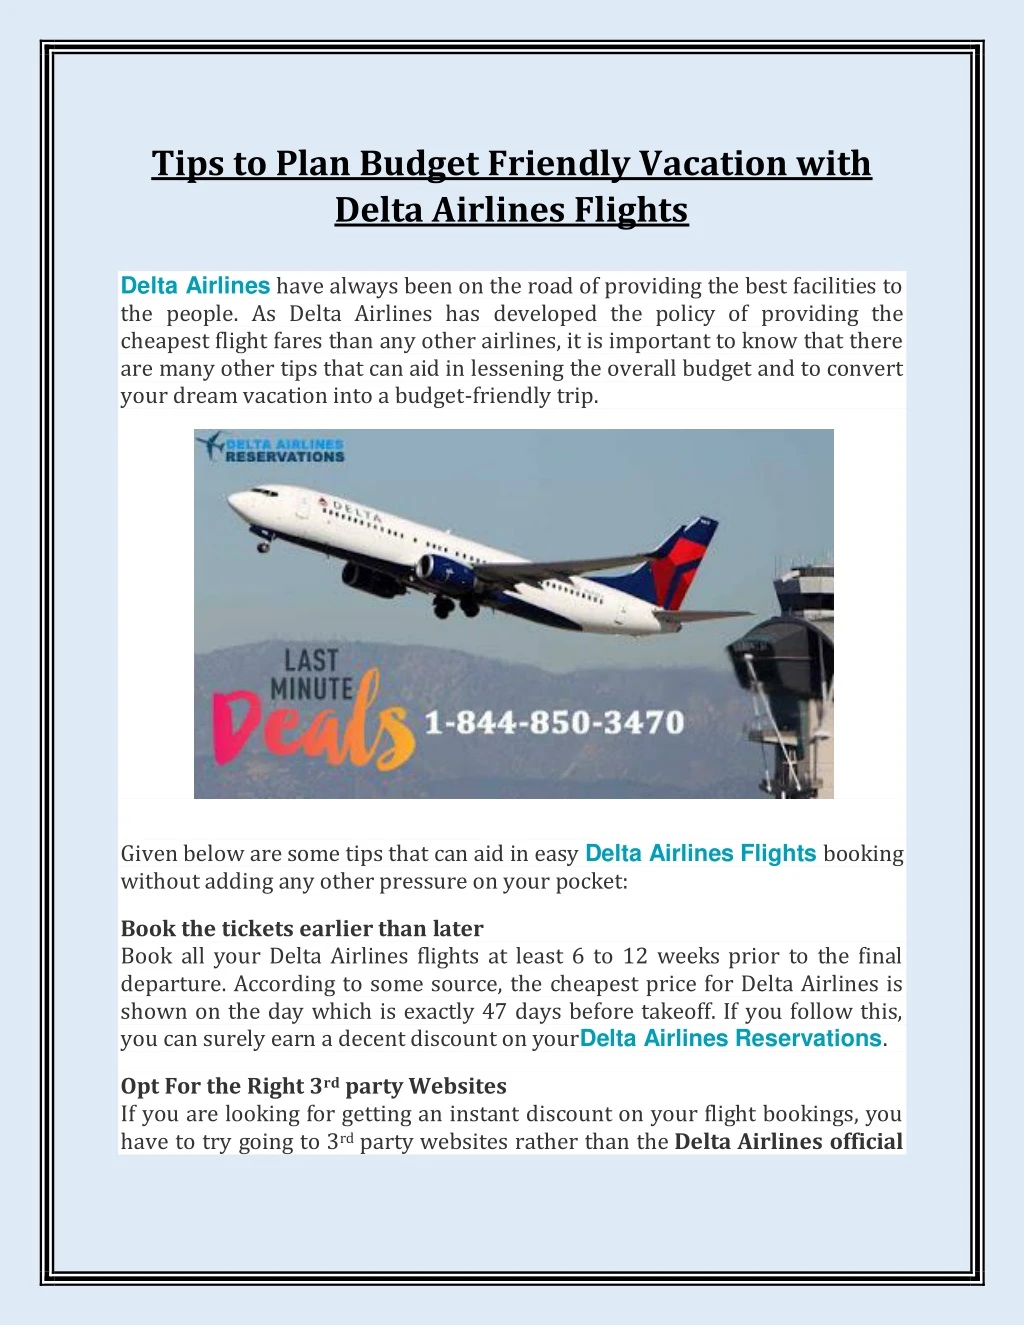 tips to plan budget friendly vacation with delta